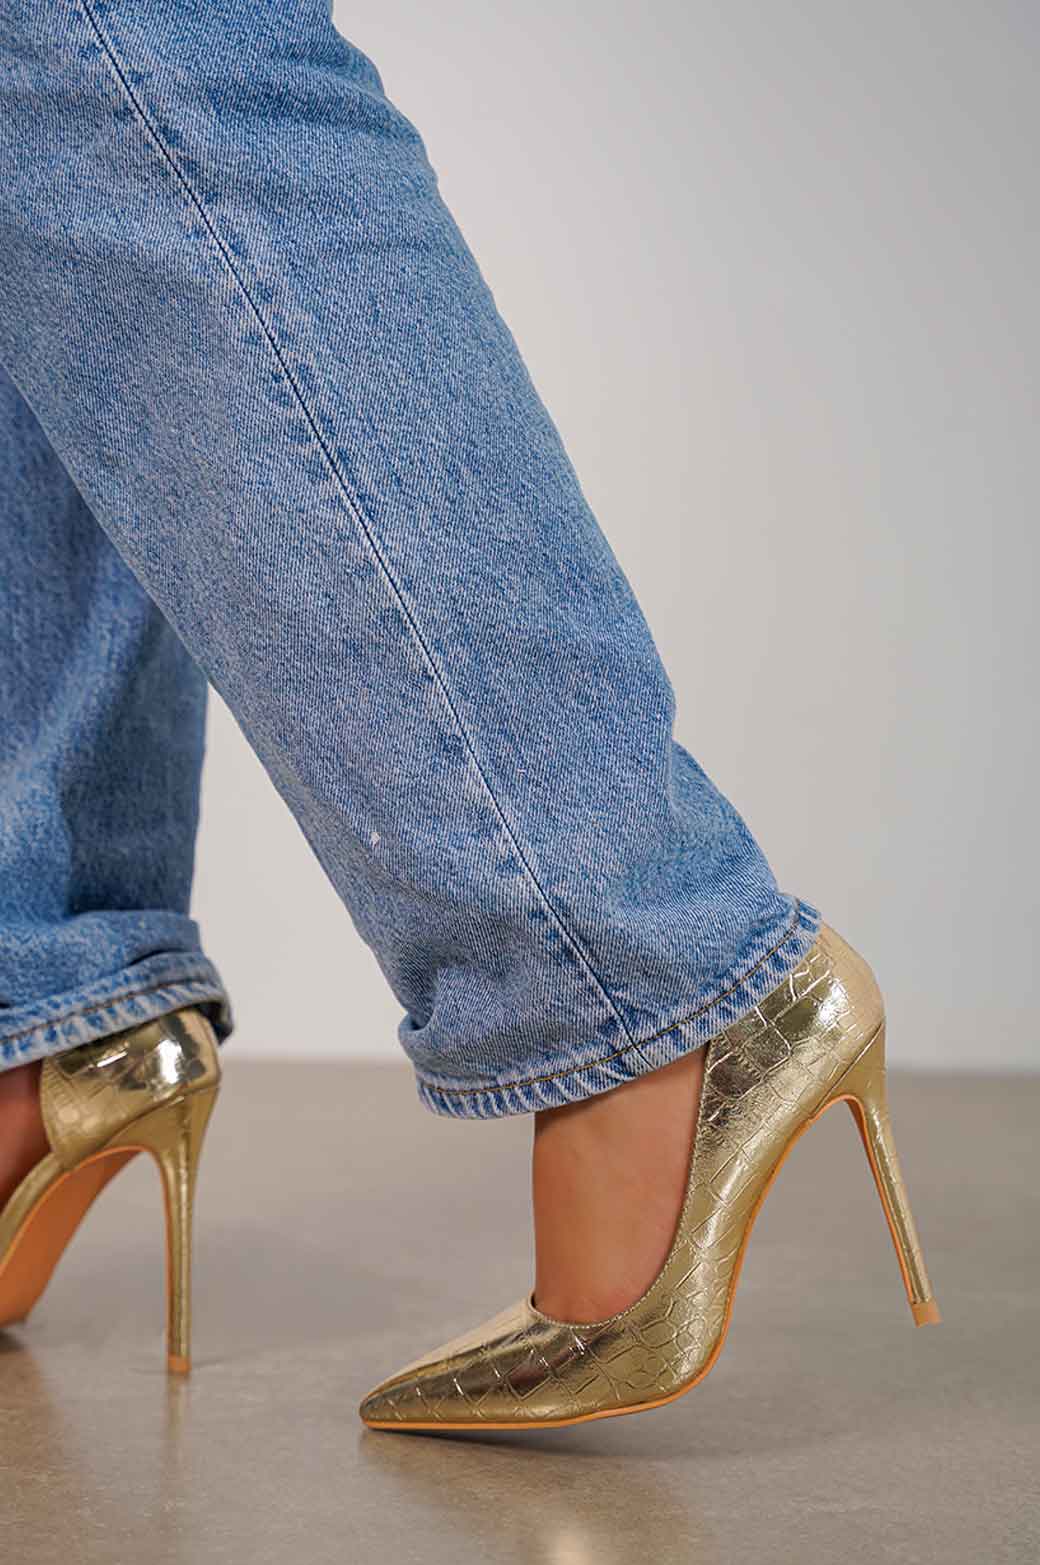 GOLD POINTED HIGH HEEL